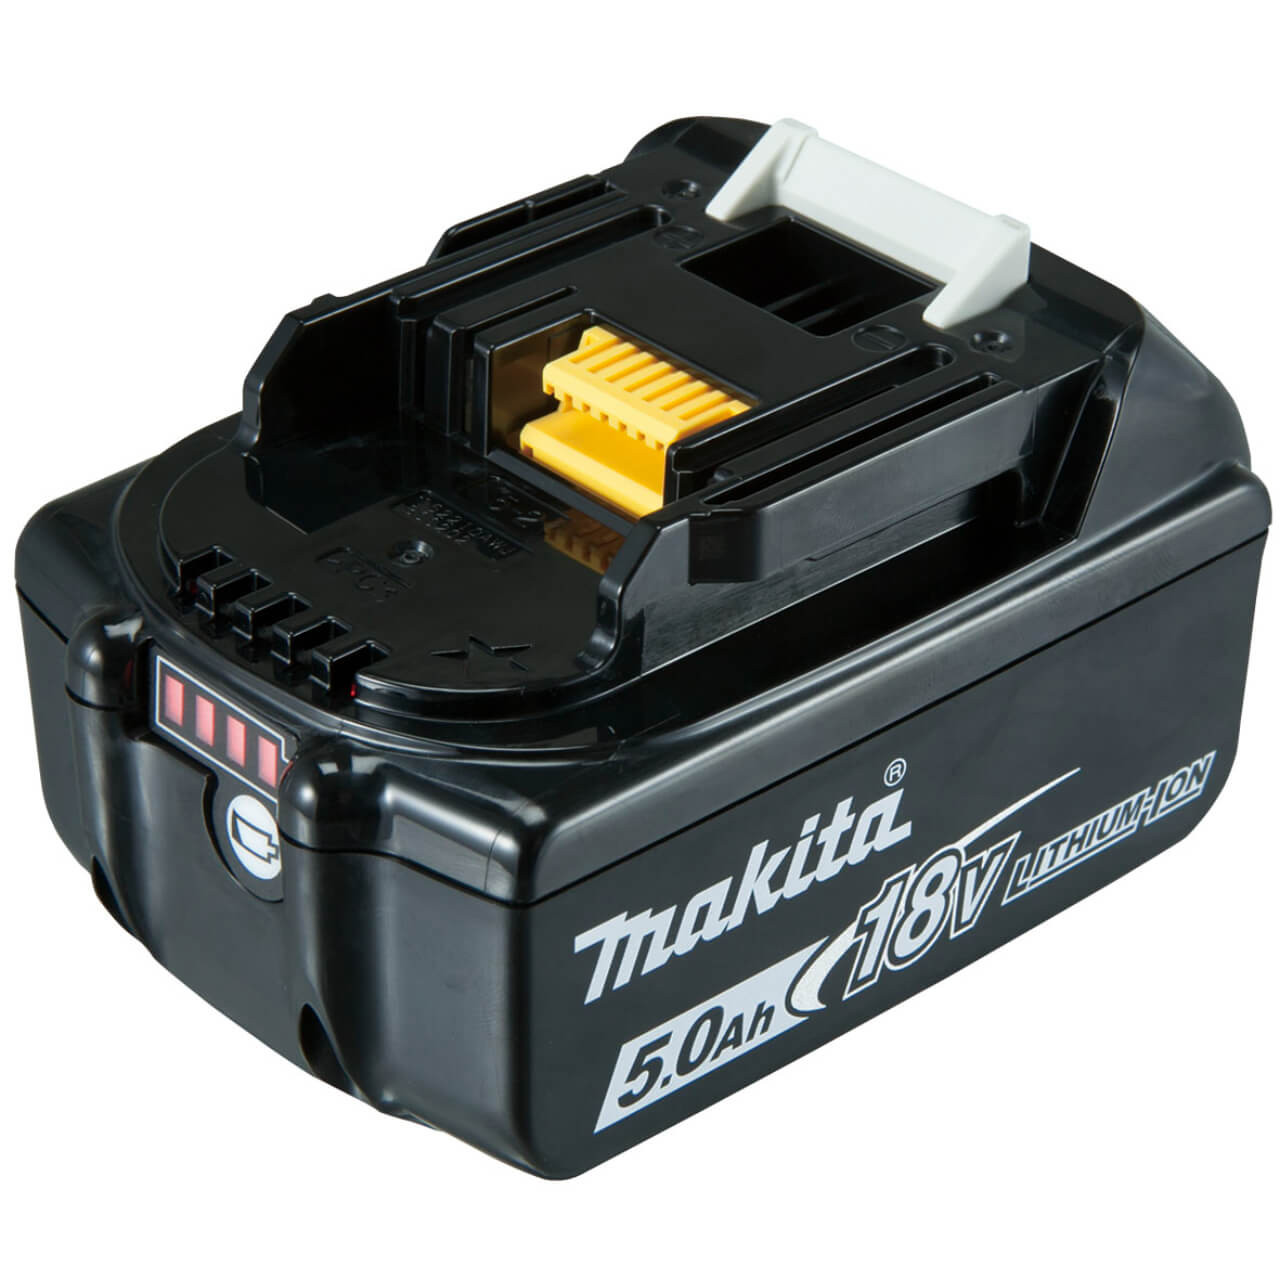 Makita 18V BRUSHLESS 24mm Quick Change Chuck Rotary Hammer Kit - Includes 2 x 5.0Ah Batteries. Rapid Charger & Carry Case